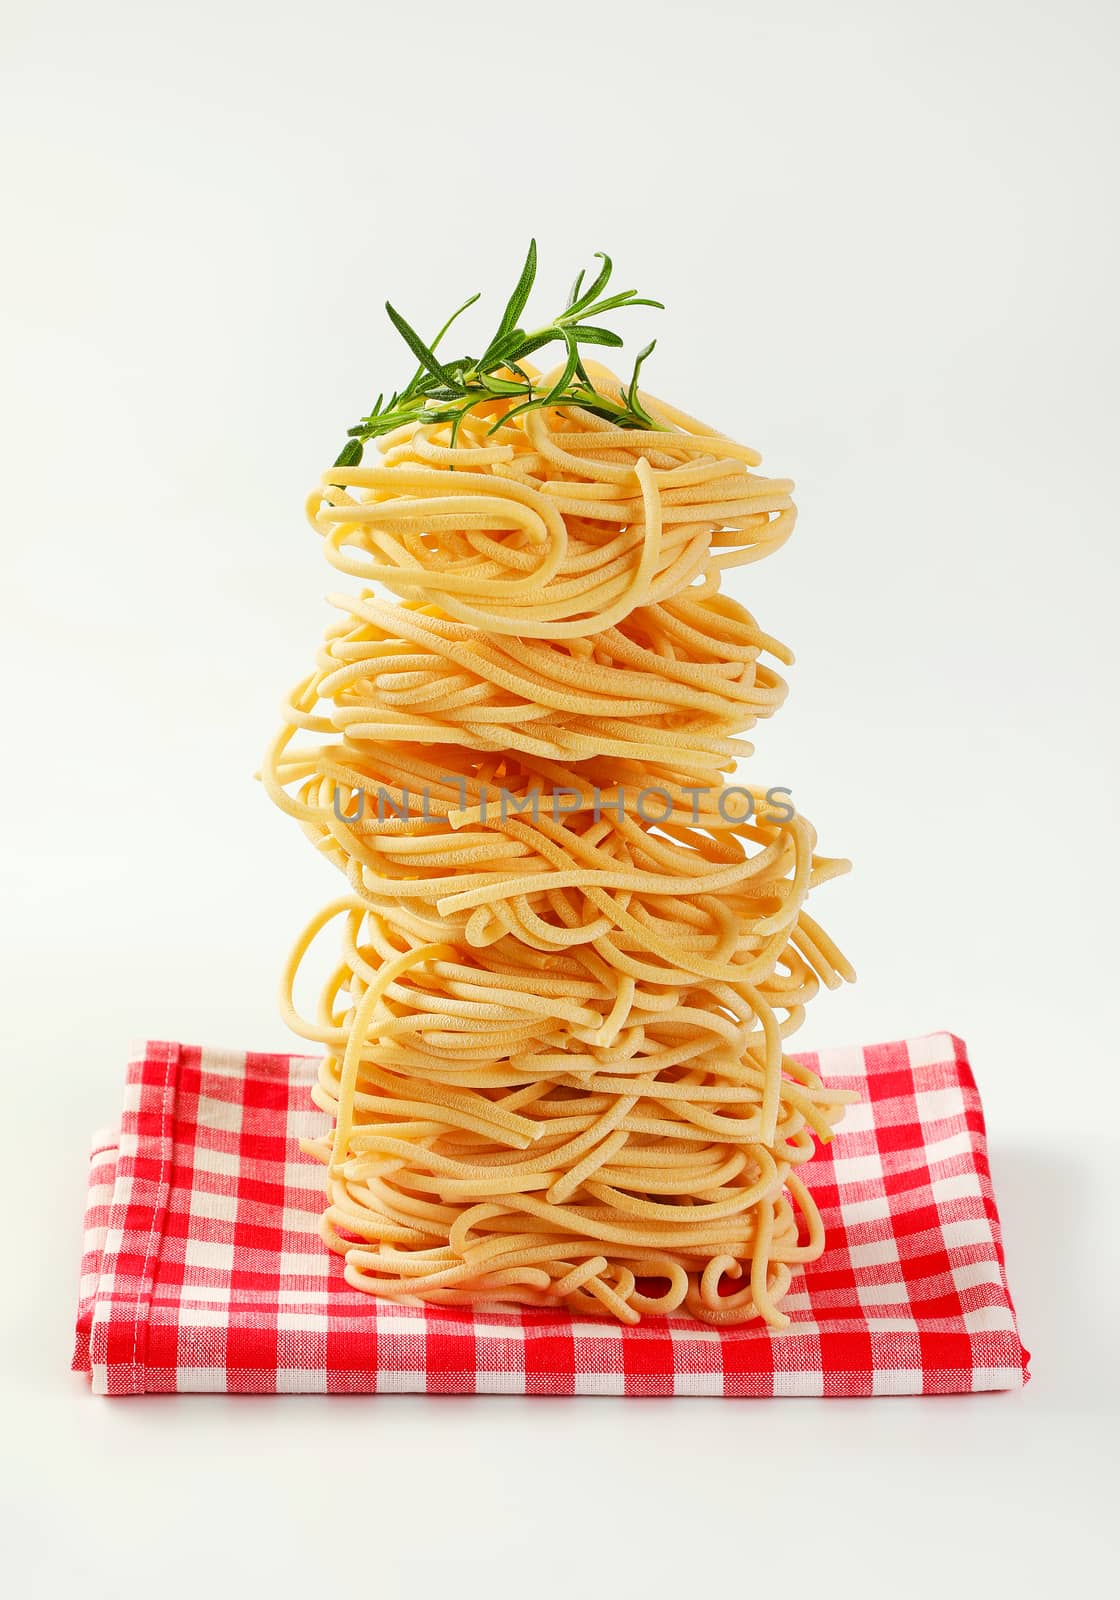 bundles of uncooked spaghetti pasta on checkered place mat